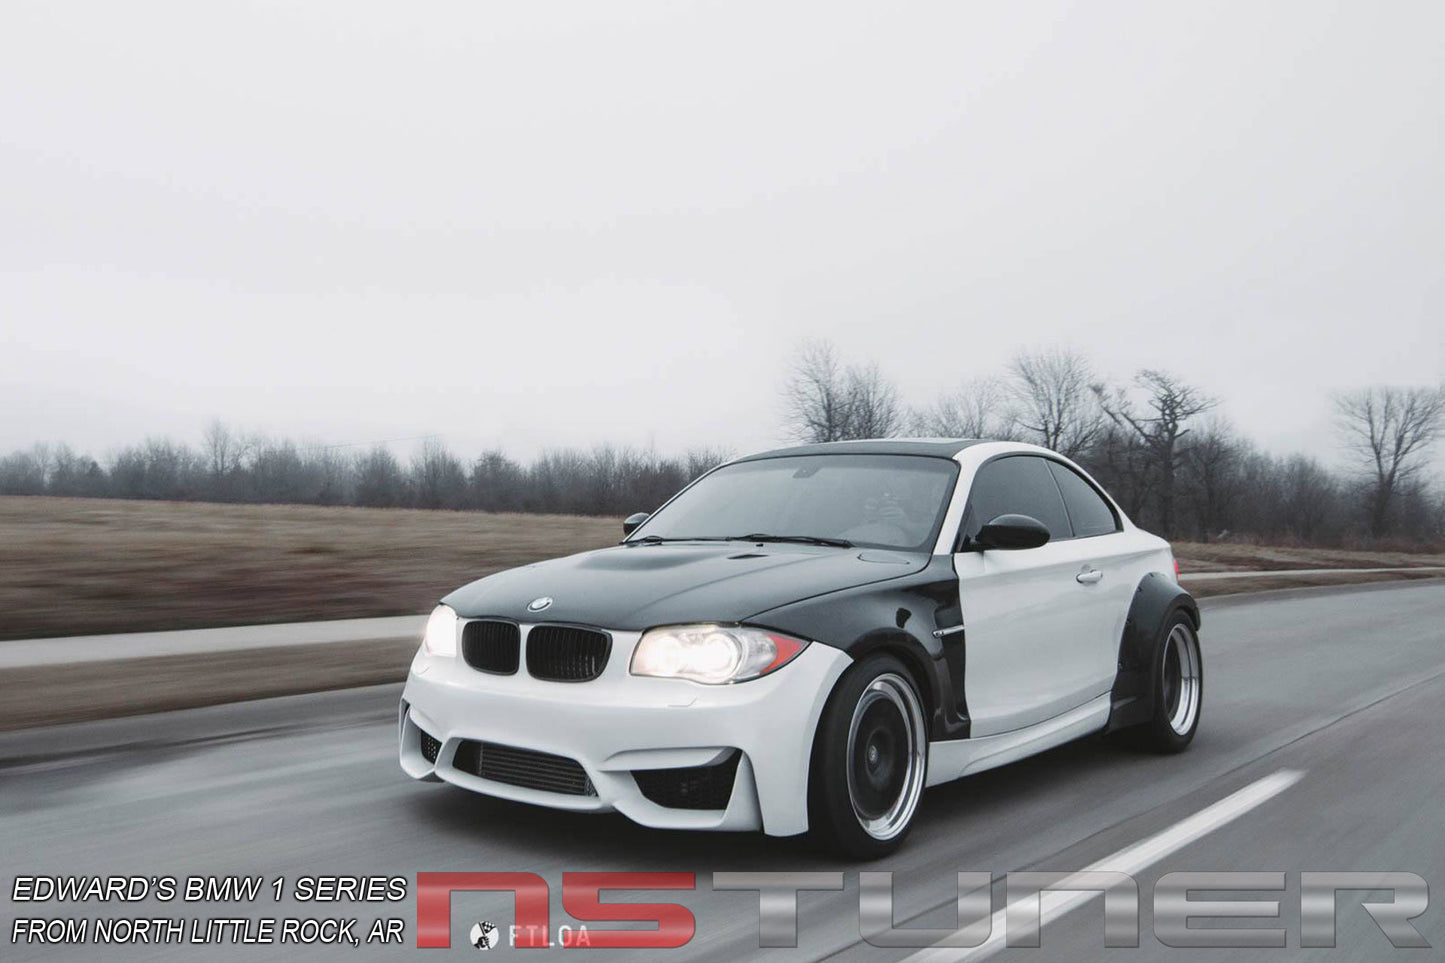 Front Fenders Wide style for the 1 Series E82 E88 135i 128i in Carbon Fiber and Fiberglass